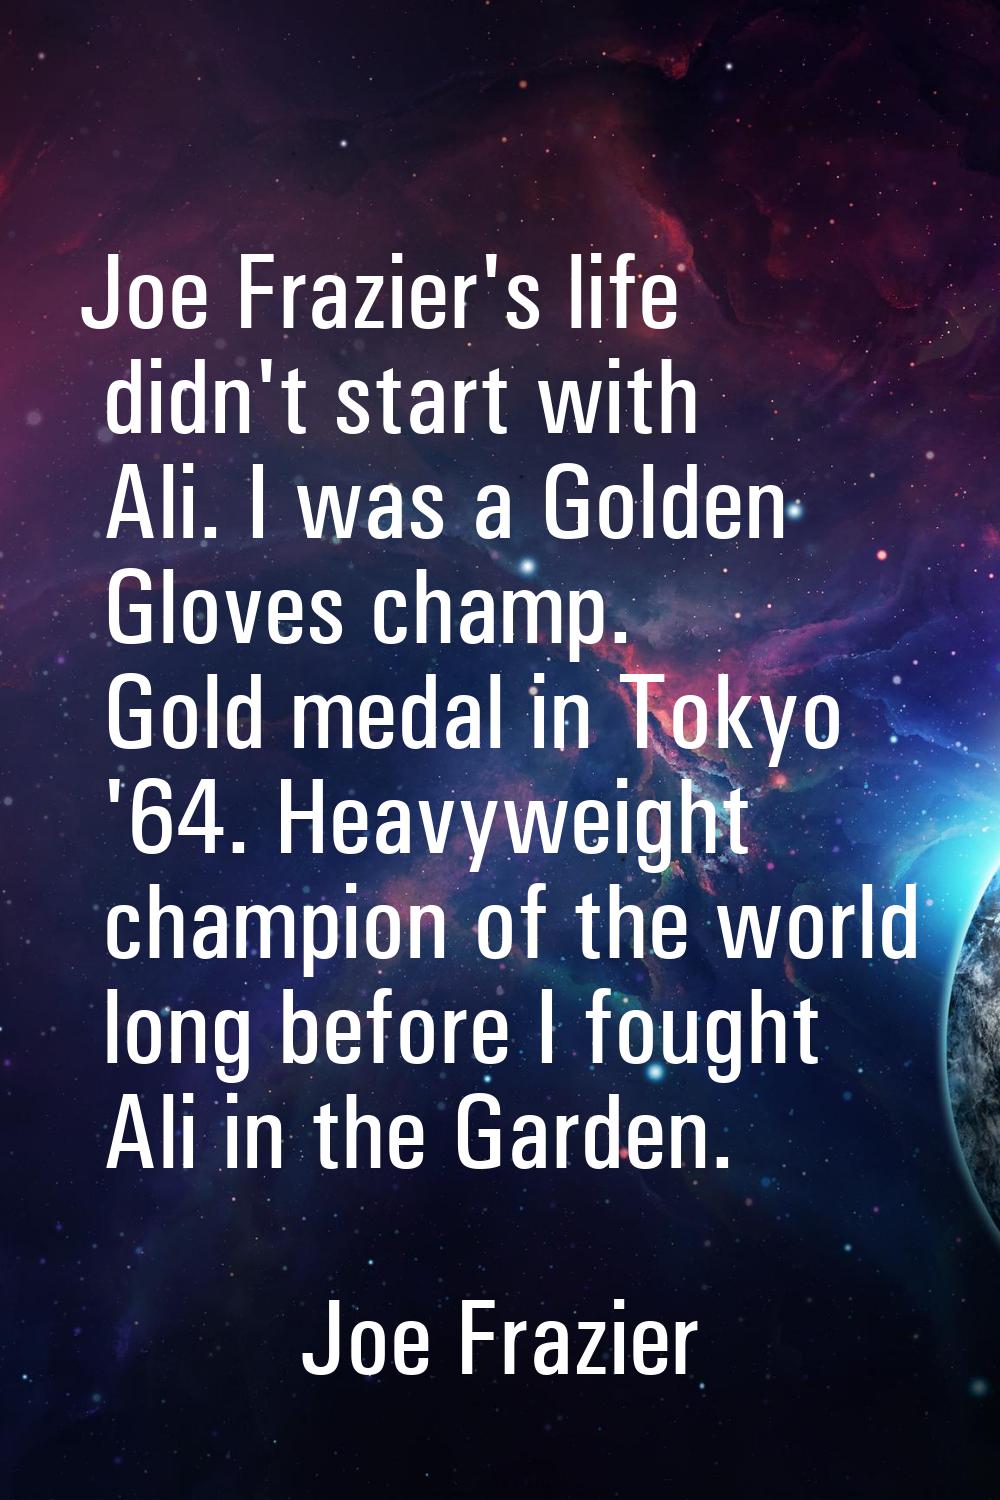 Joe Frazier's life didn't start with Ali. I was a Golden Gloves champ. Gold medal in Tokyo '64. Hea